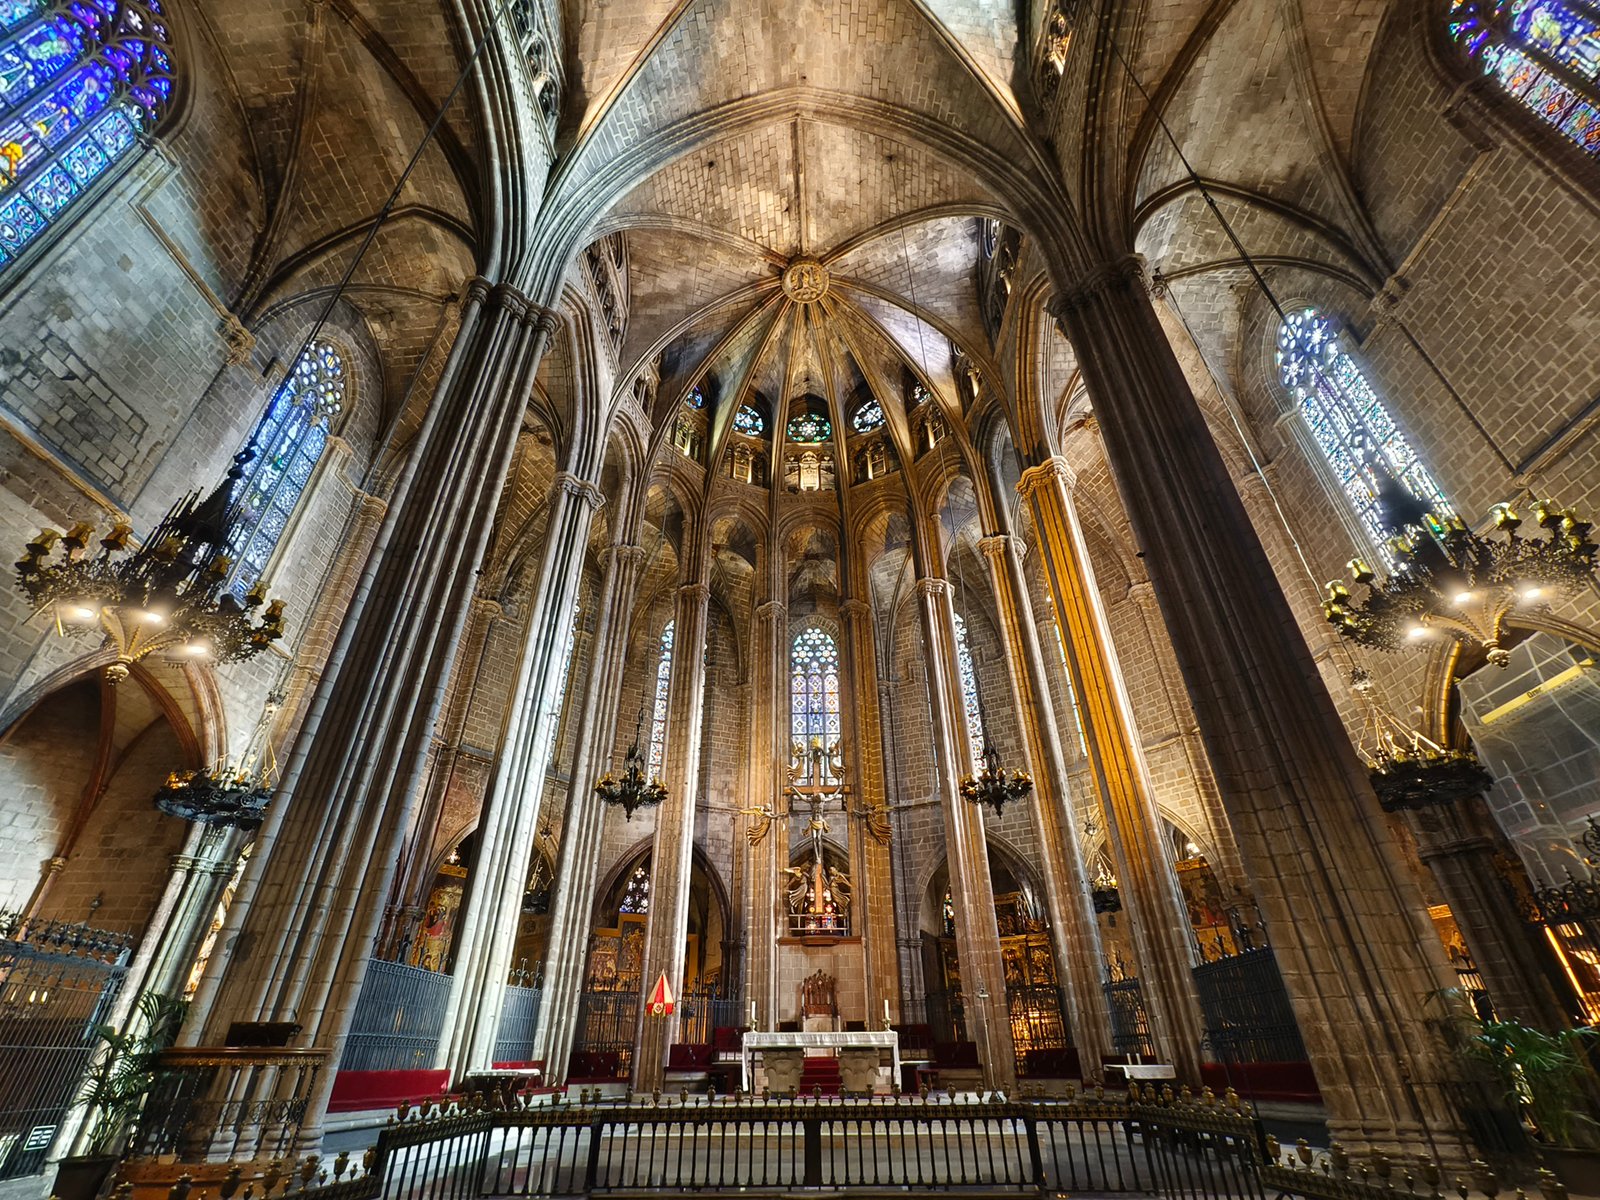 Interior of a gothic cathedral with soaring vaulted ceilings, stained glass windows, and a detailed altar bathed in soft light. the structural columns and ornate lamps add to the historical ambiance.